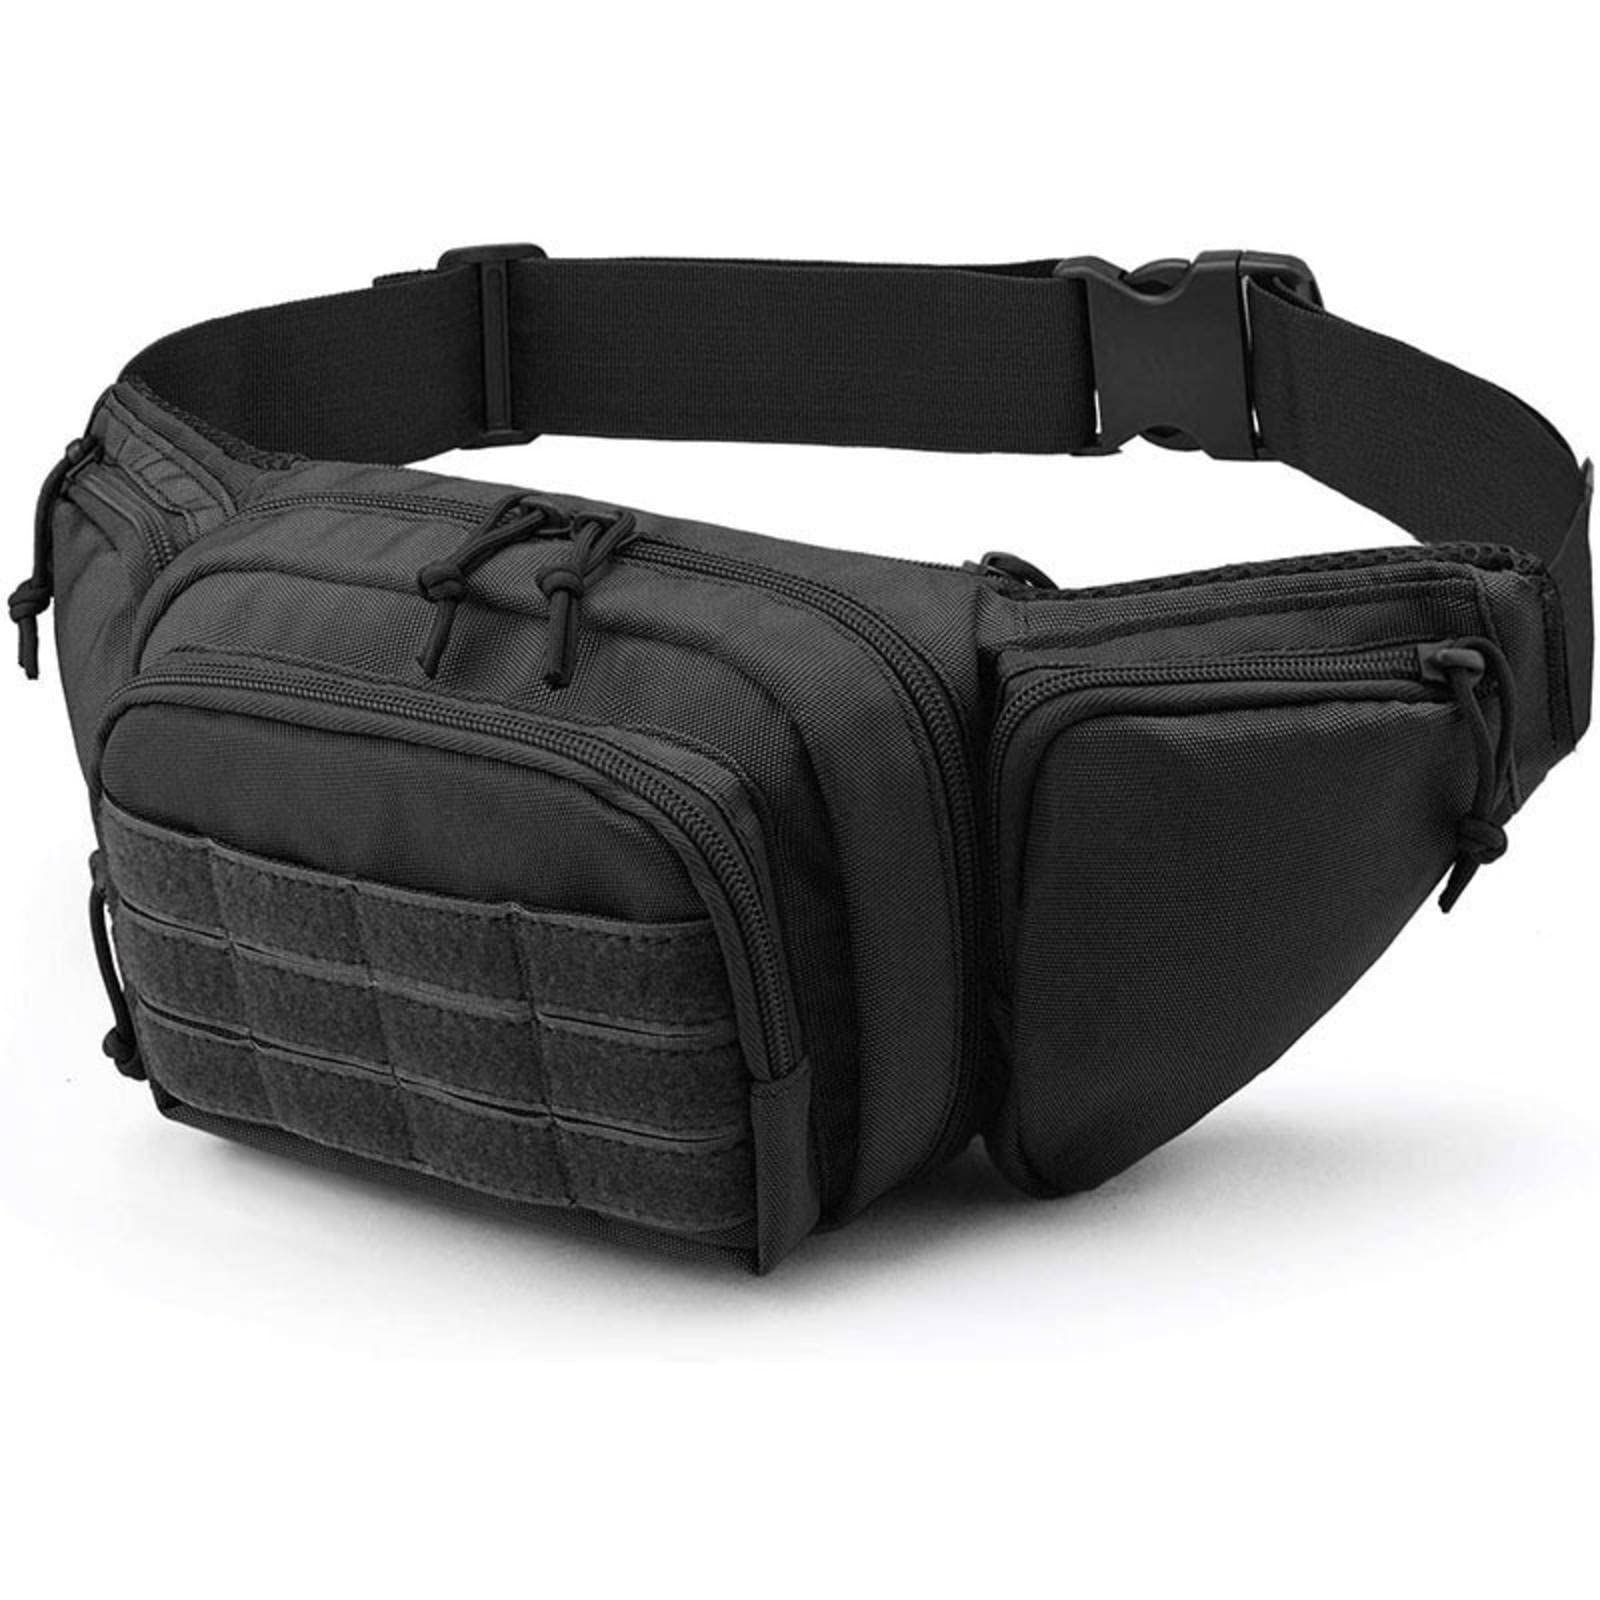 Early Christmas Gift 50% OFF🎄Outdoor Mountaineering Leisure Tactical Waist Bag🎁BUY 2 GET FREE SHIPPING